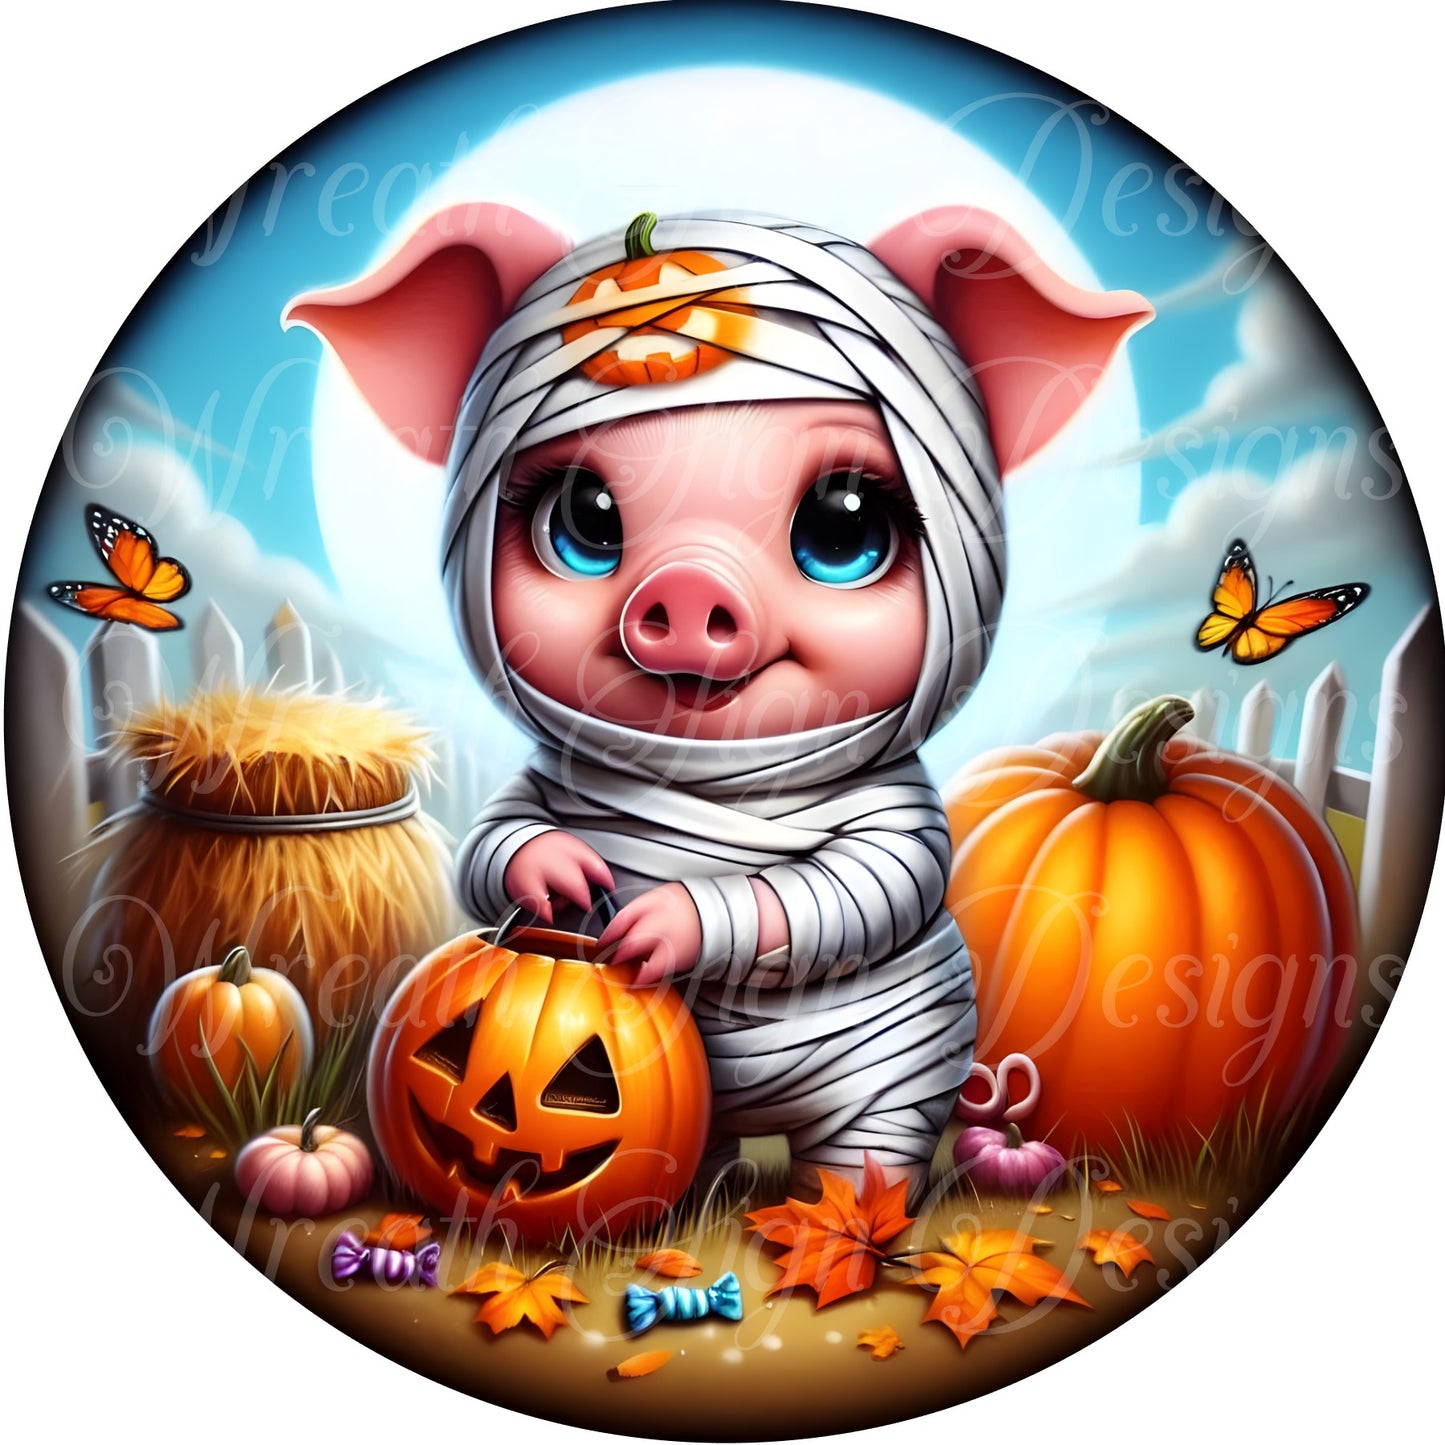 Whimsical Halloween Pig, trick -or- treat pig dressed as mummy, Piglet and pumpkin round metal wreath sign, wreath center, wreath attachment